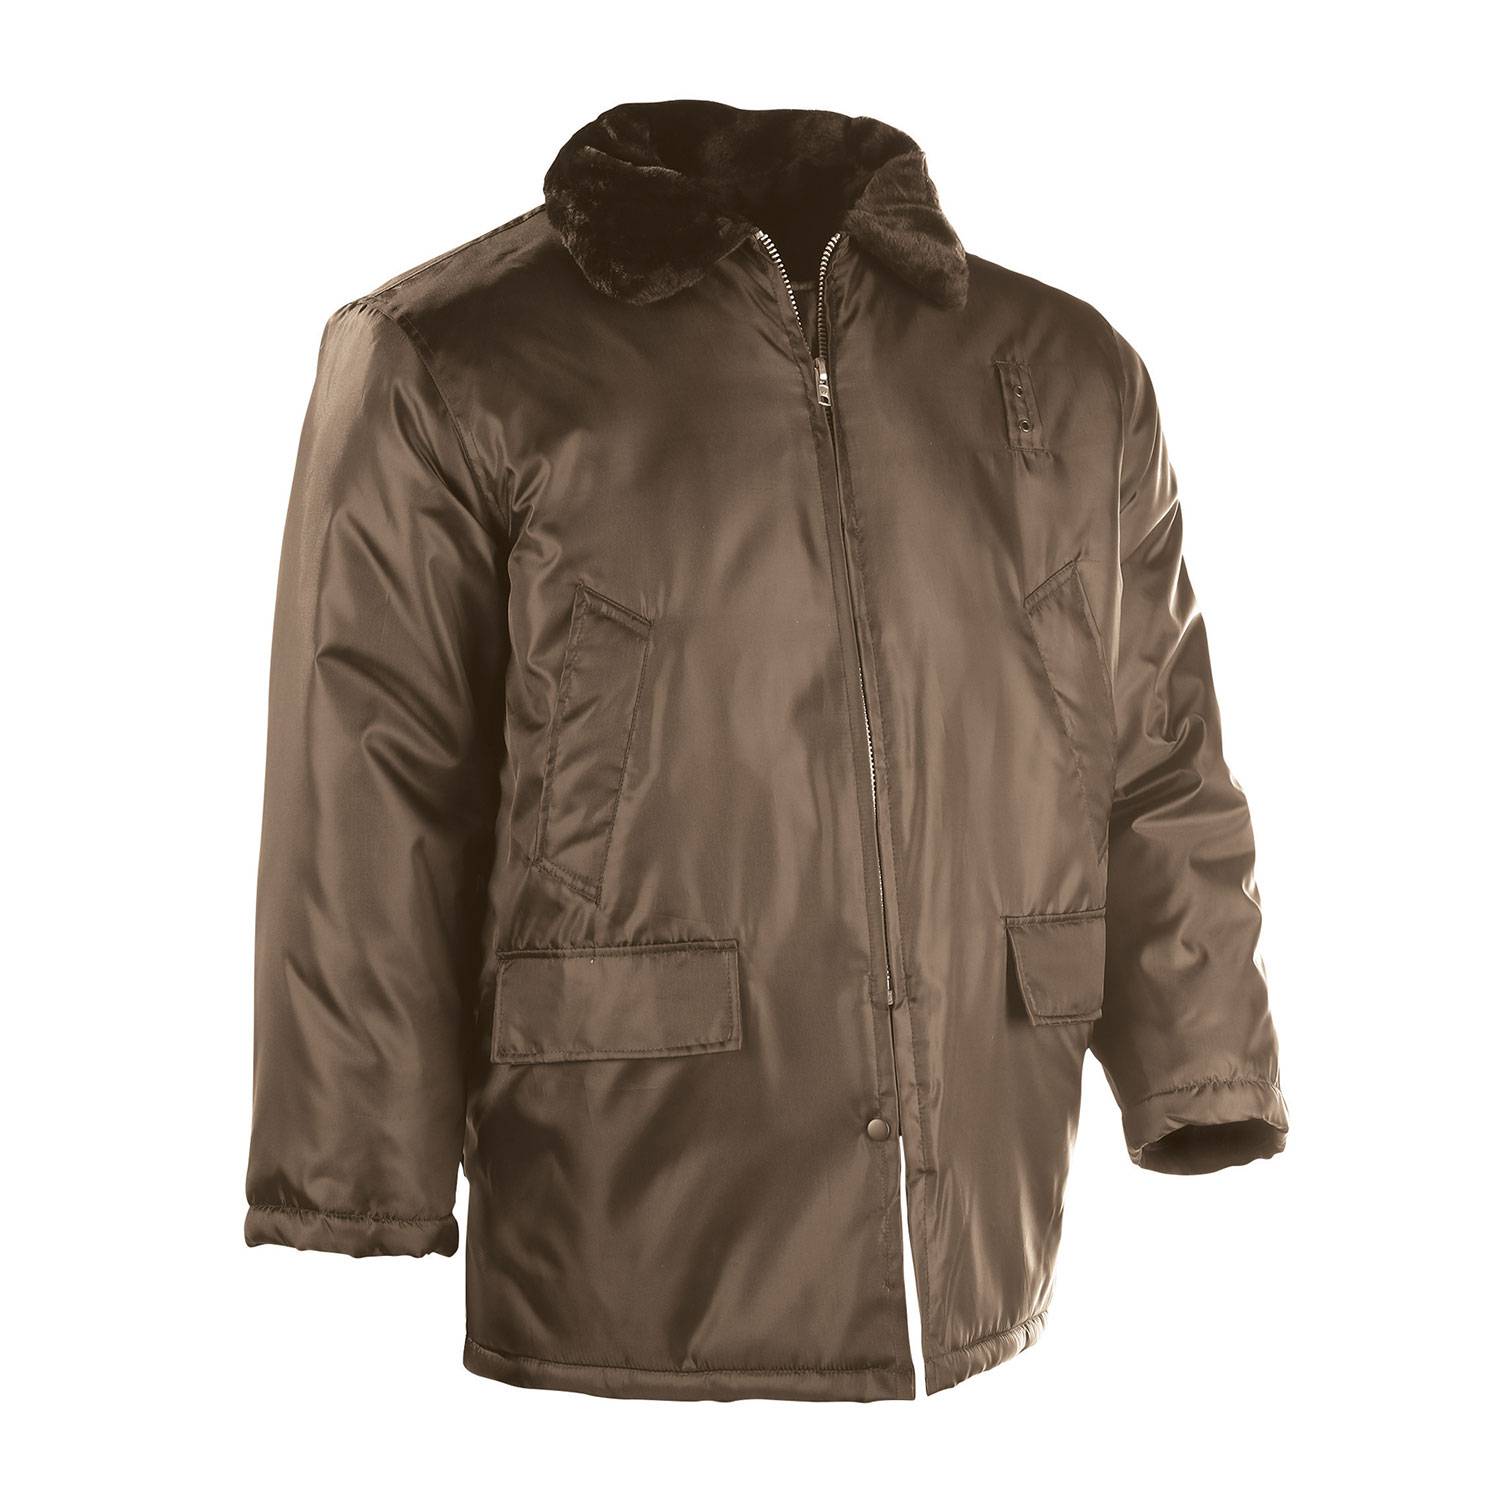 LawPro Parka with Removable Hood